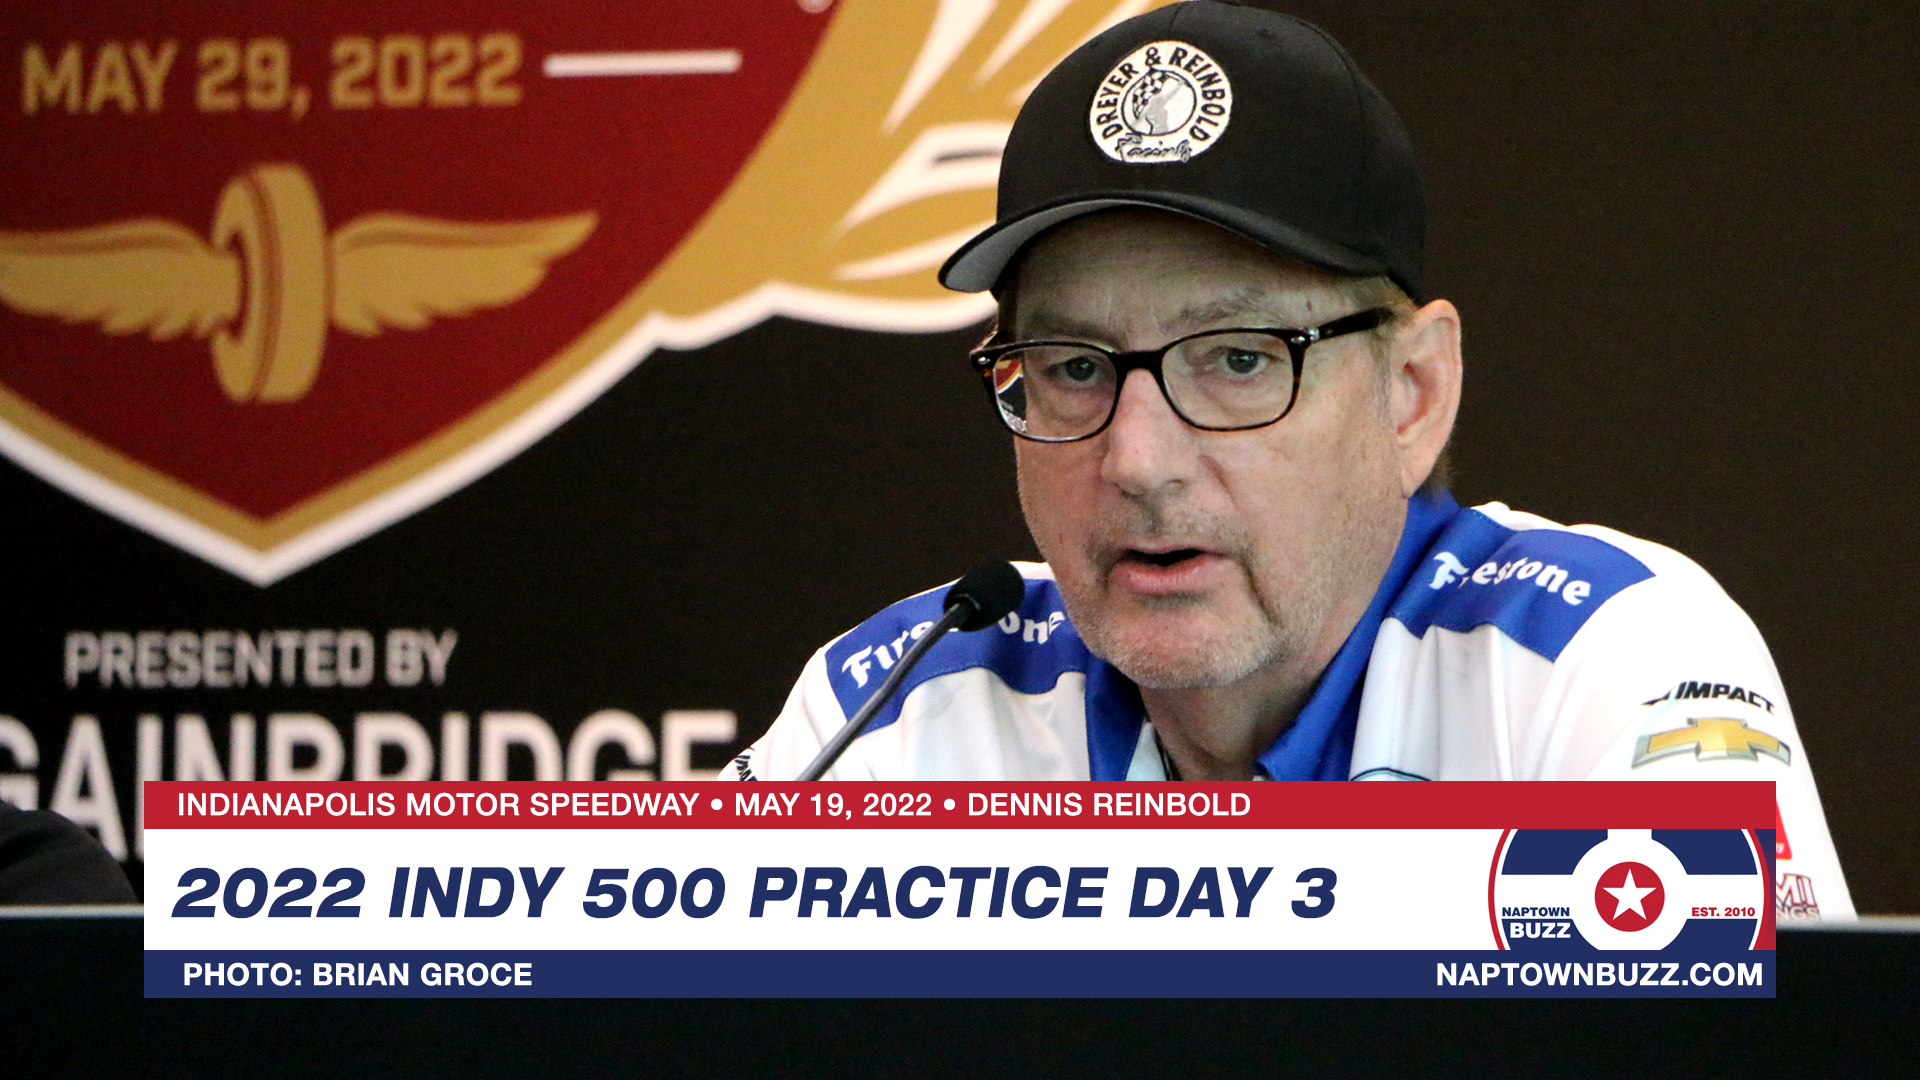 Dennis Reinbold on Indy 500 Practice Day 3 at Indianapolis Motor Speedway on May 19, 2022